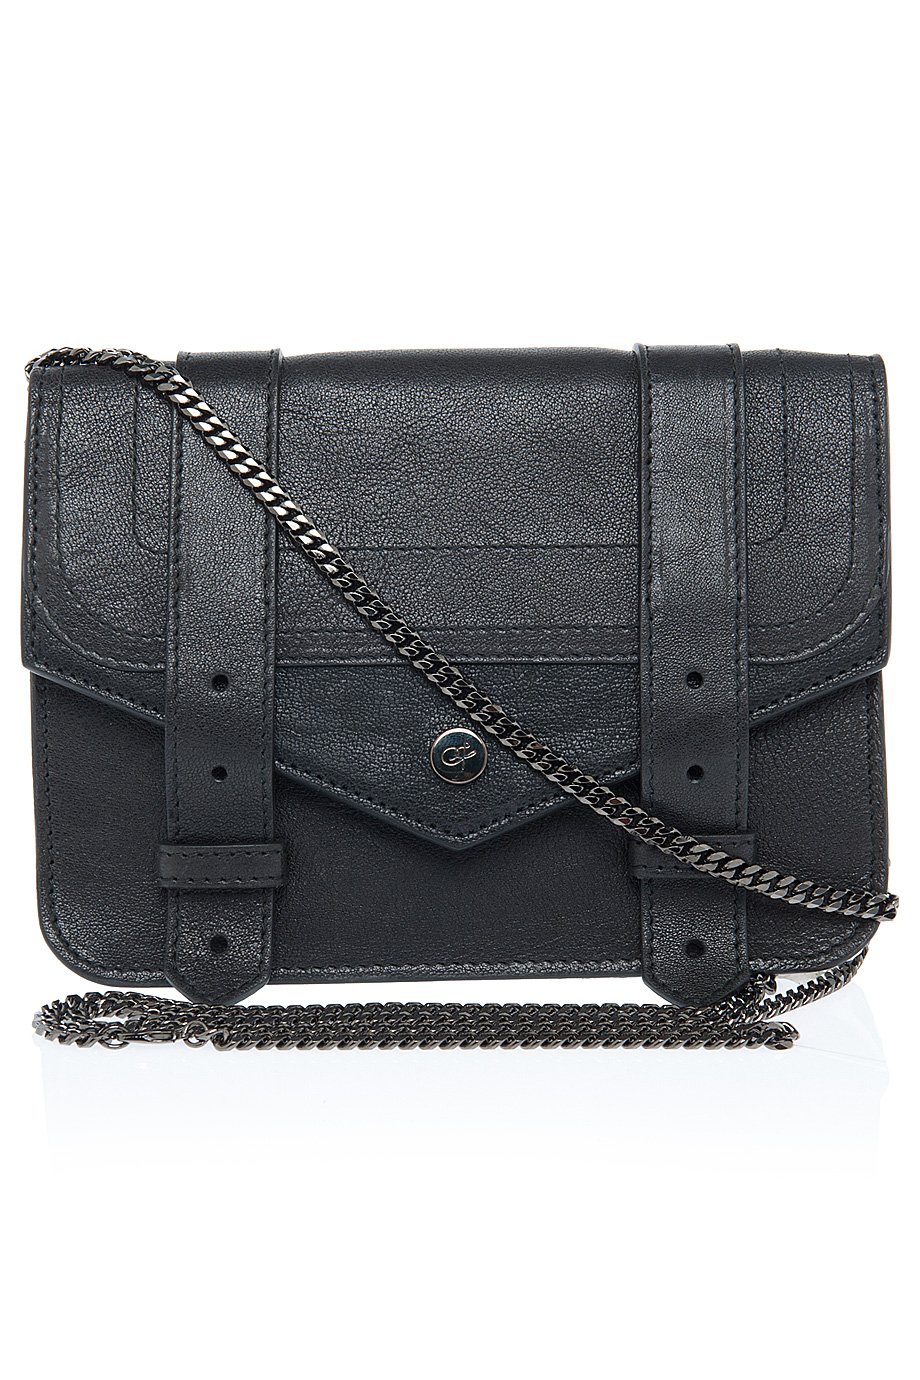 Proenza schouler Ps1 Large Leather Chain Wallet in Black | Lyst